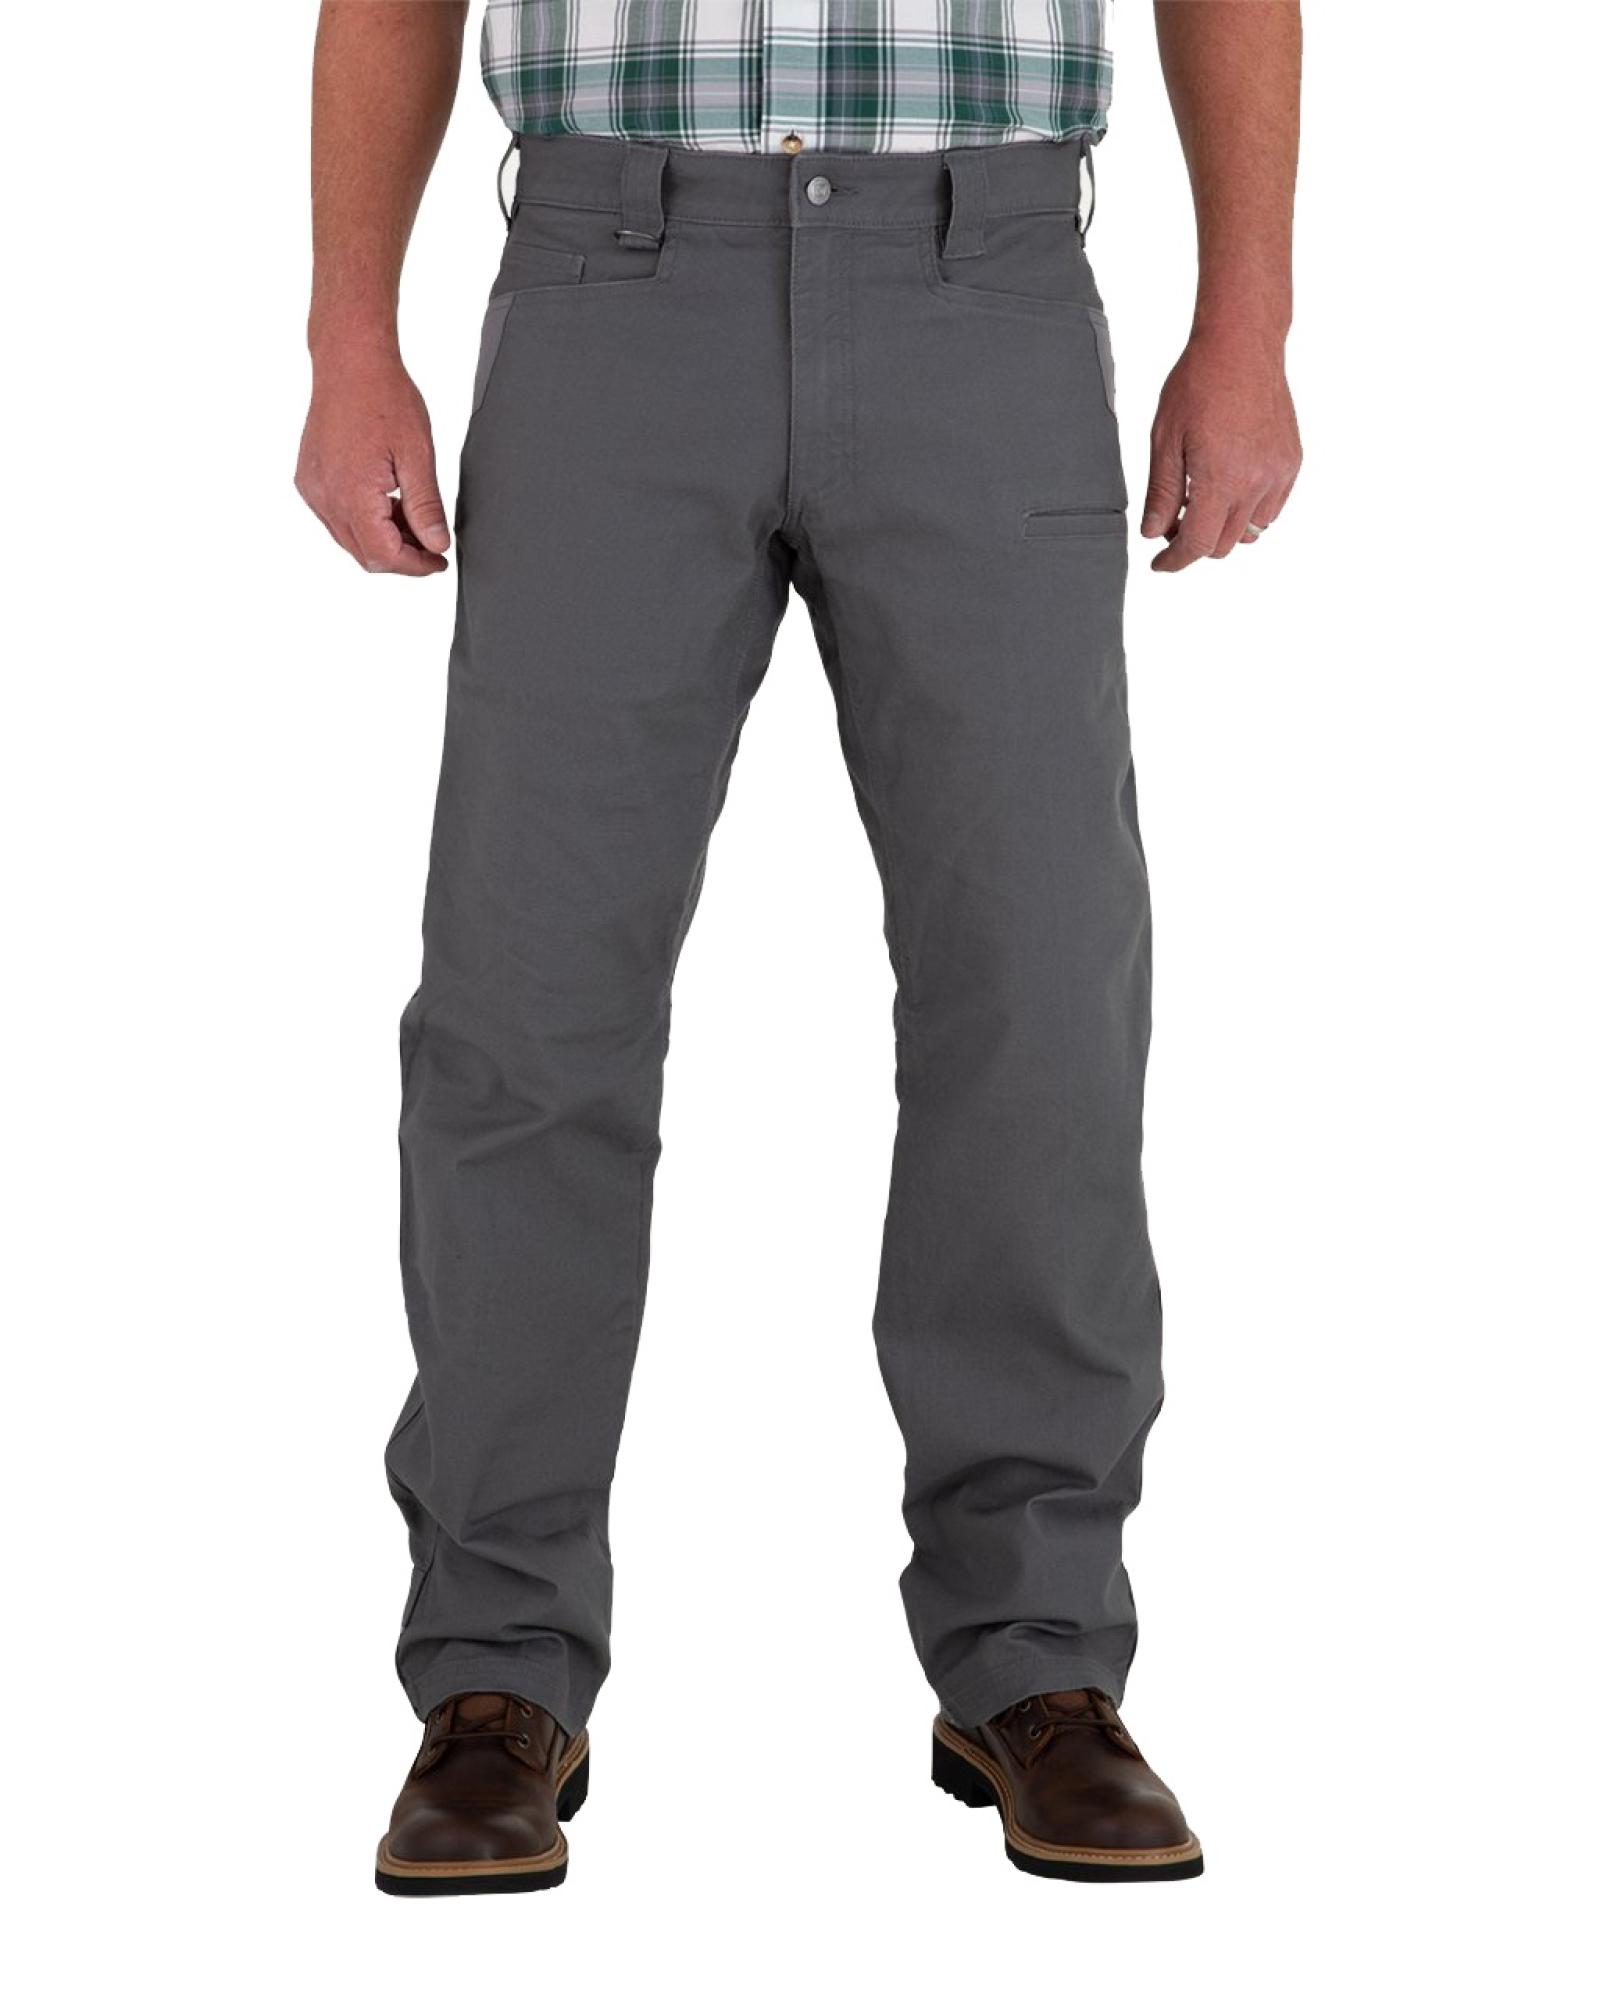 Noble Outfitters Men's FullFlexx HD Hammer Drill Canvas Work Pants